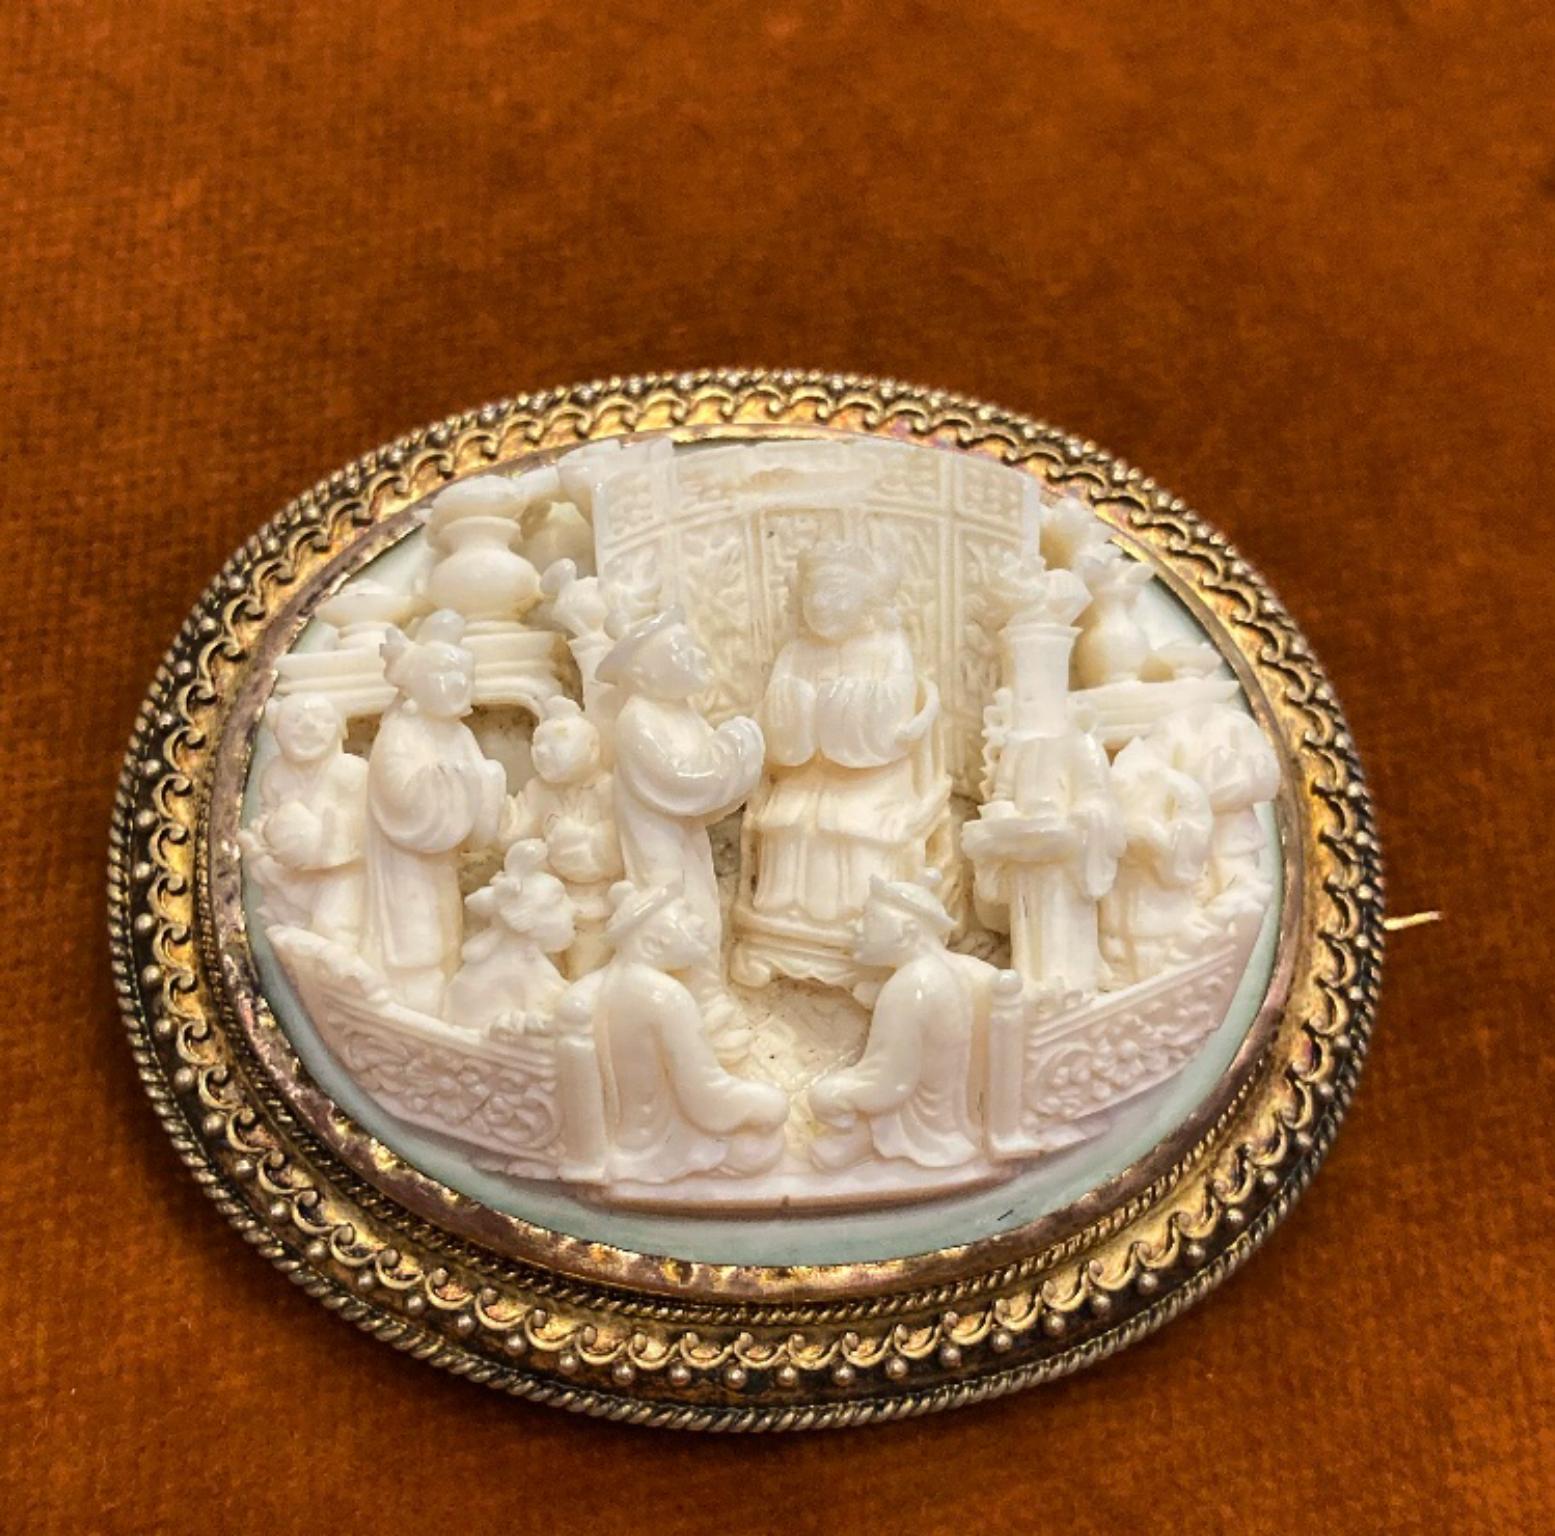 An antique nineteenth century carved bone and yellow gold brooch-pendant depicting an Eastern scene.